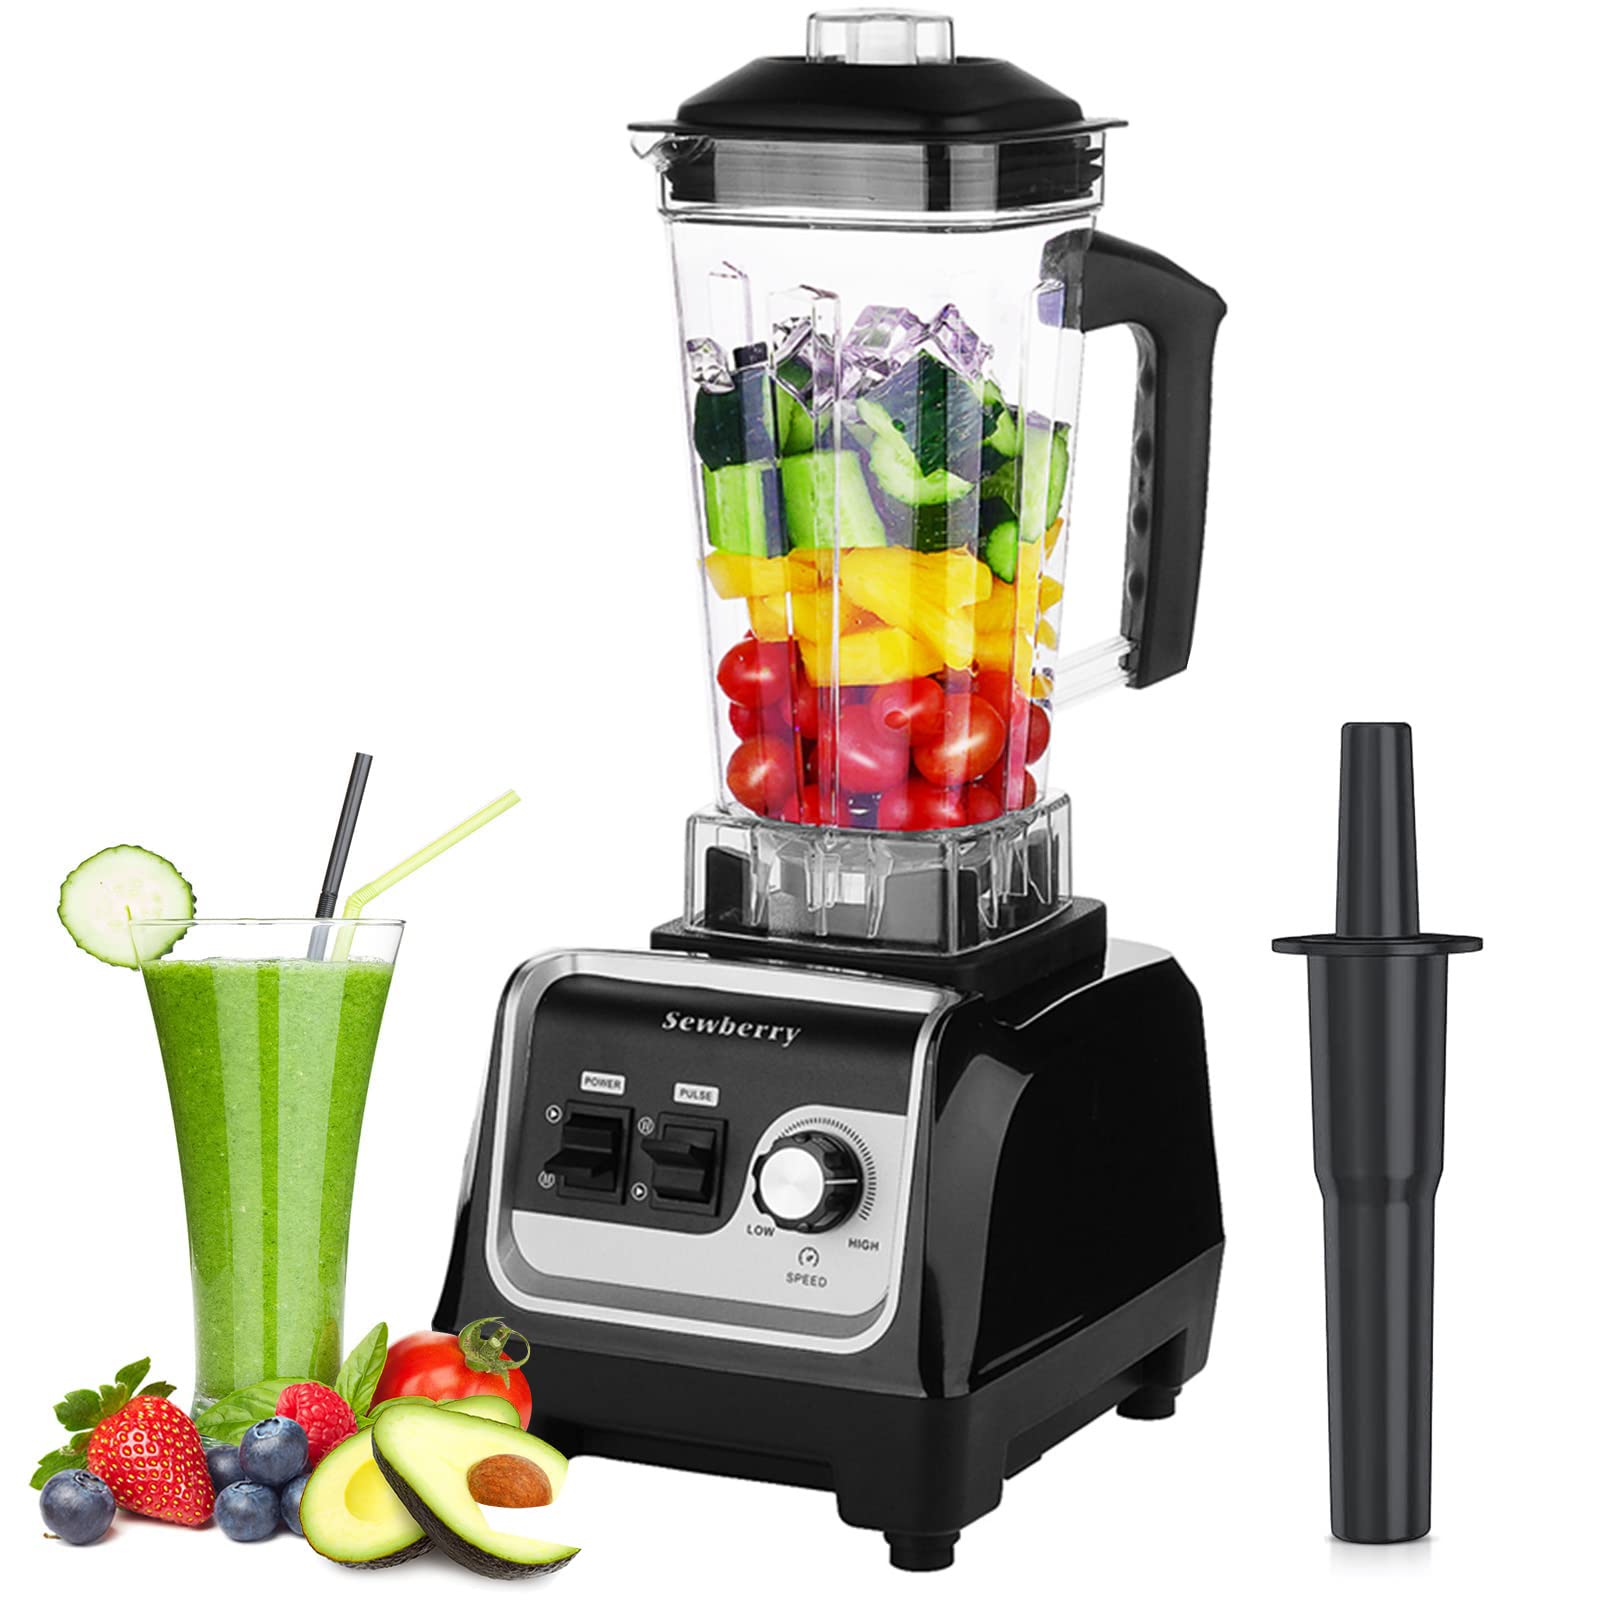 Sewberry Professional countertop Blender for home and commercial use, 2200W High Speed Smoothie Blender for Shakes and Smoothies with 70O